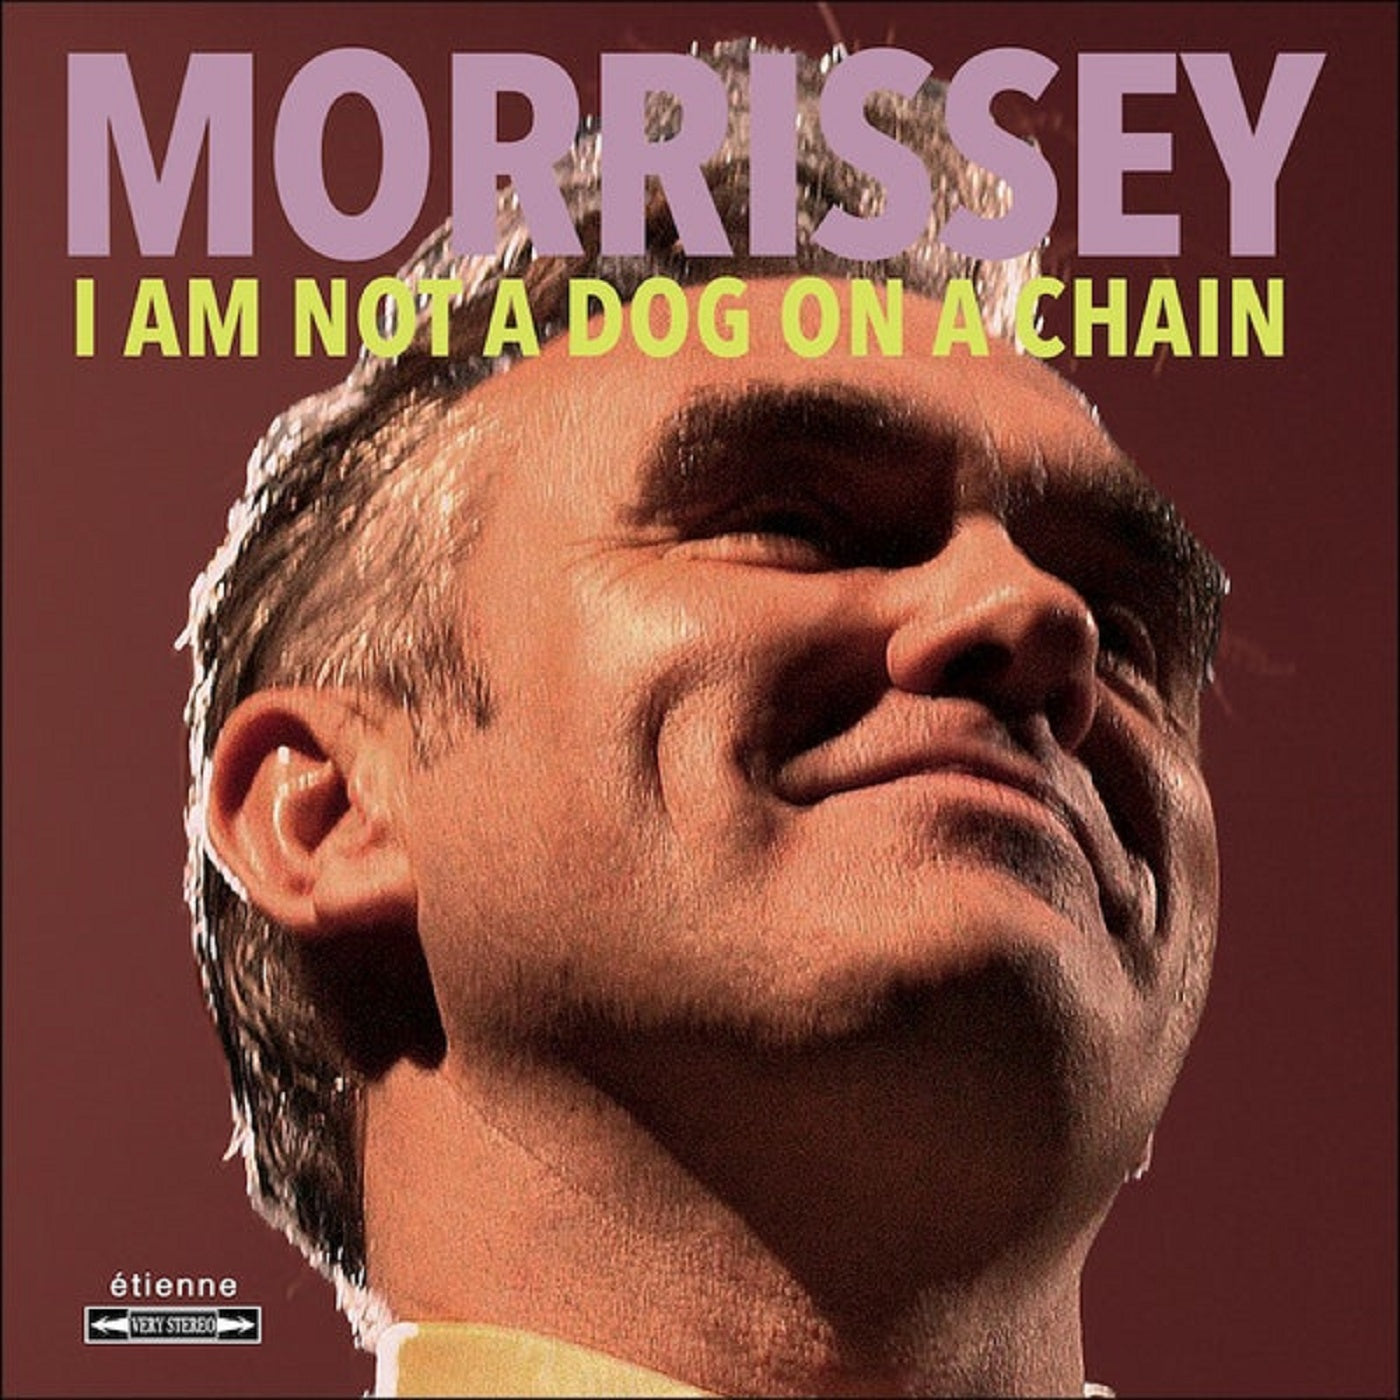 Morrissey - I Am Not A Dog On a Chain - BROKEN 8 RECORDS